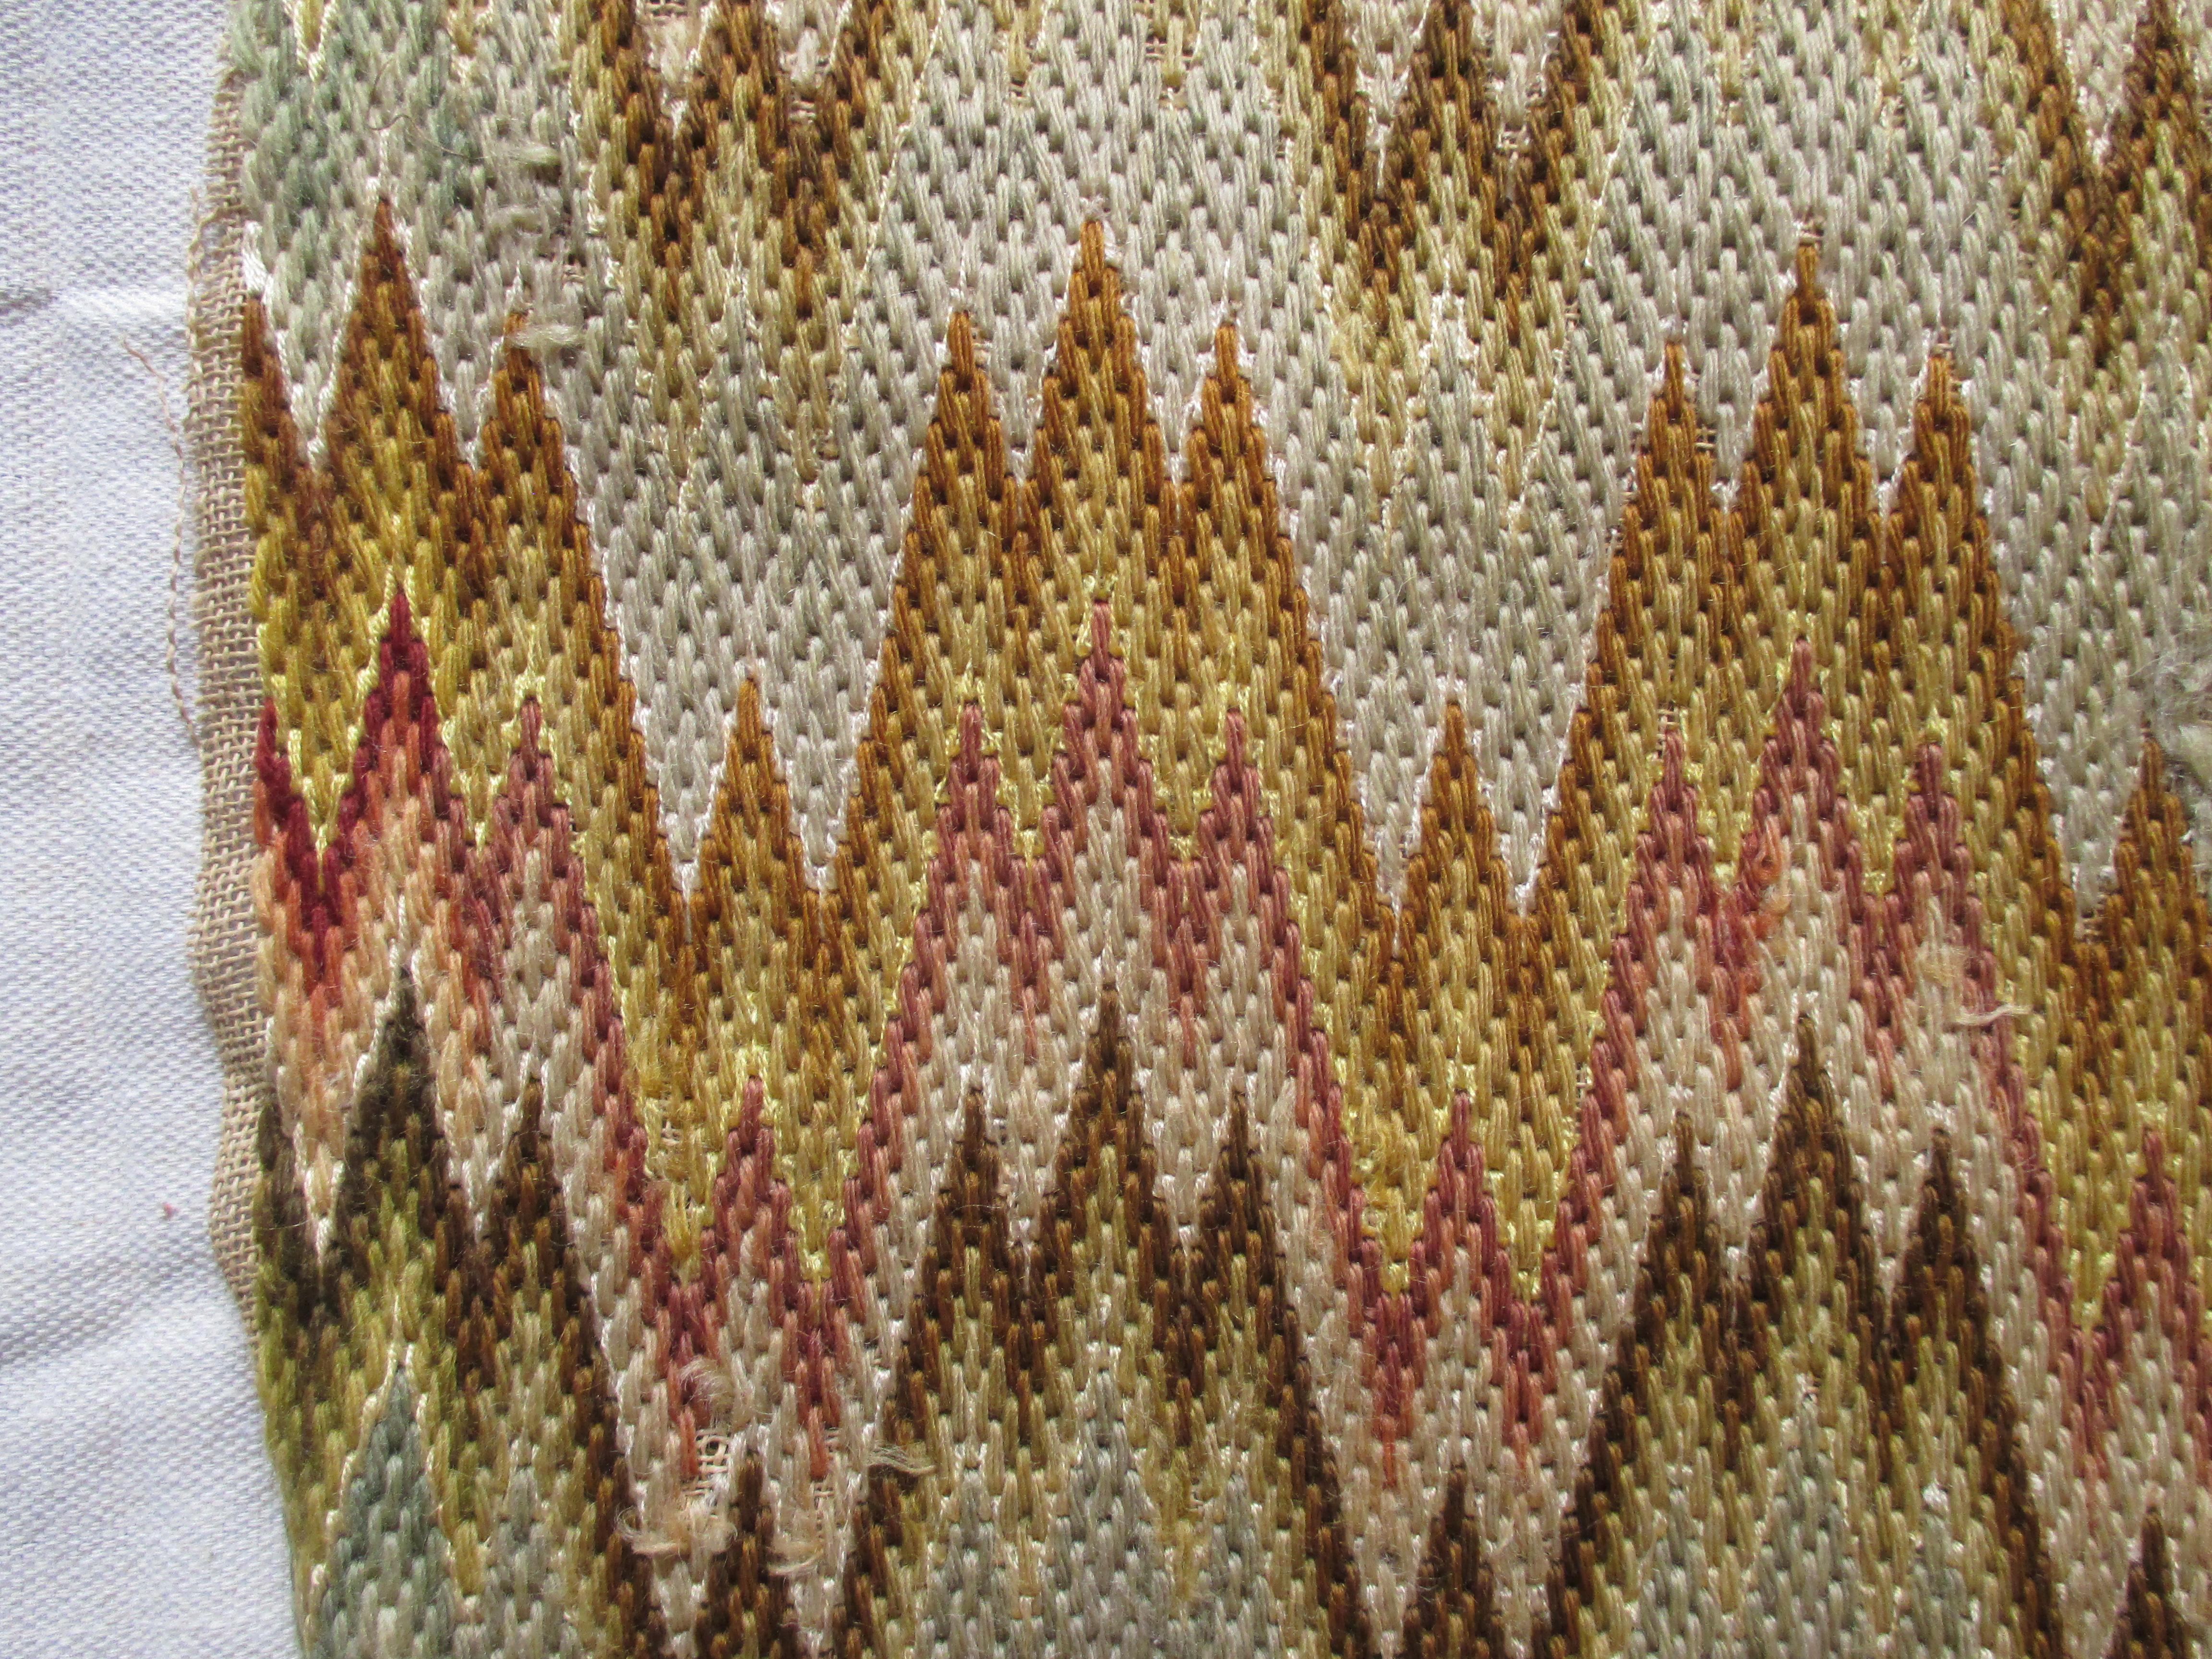 Antique flame stitch textile fragment
Pattern: Aurora Borealis.
In shades of yellow, orange, green on a geometrical pattern
Needs restoration and backing.
Ideal for a pillow or upholstery.
Size: 17